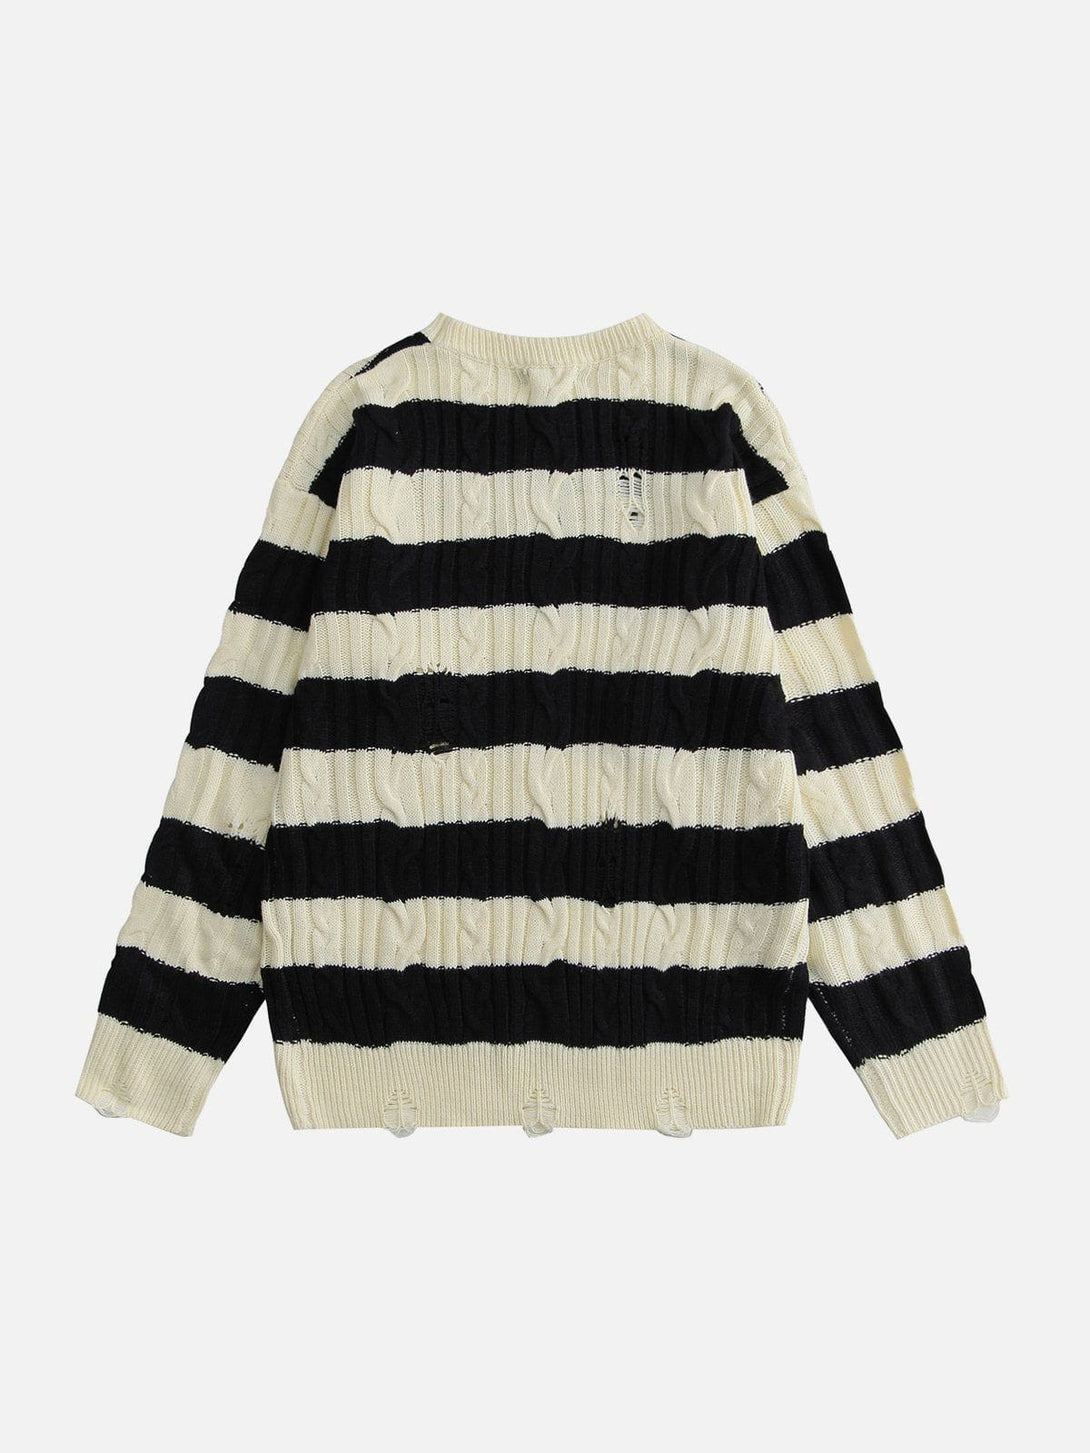 Majesda® - Torn Stripe Collision Color Sweater outfit ideas streetwear fashion